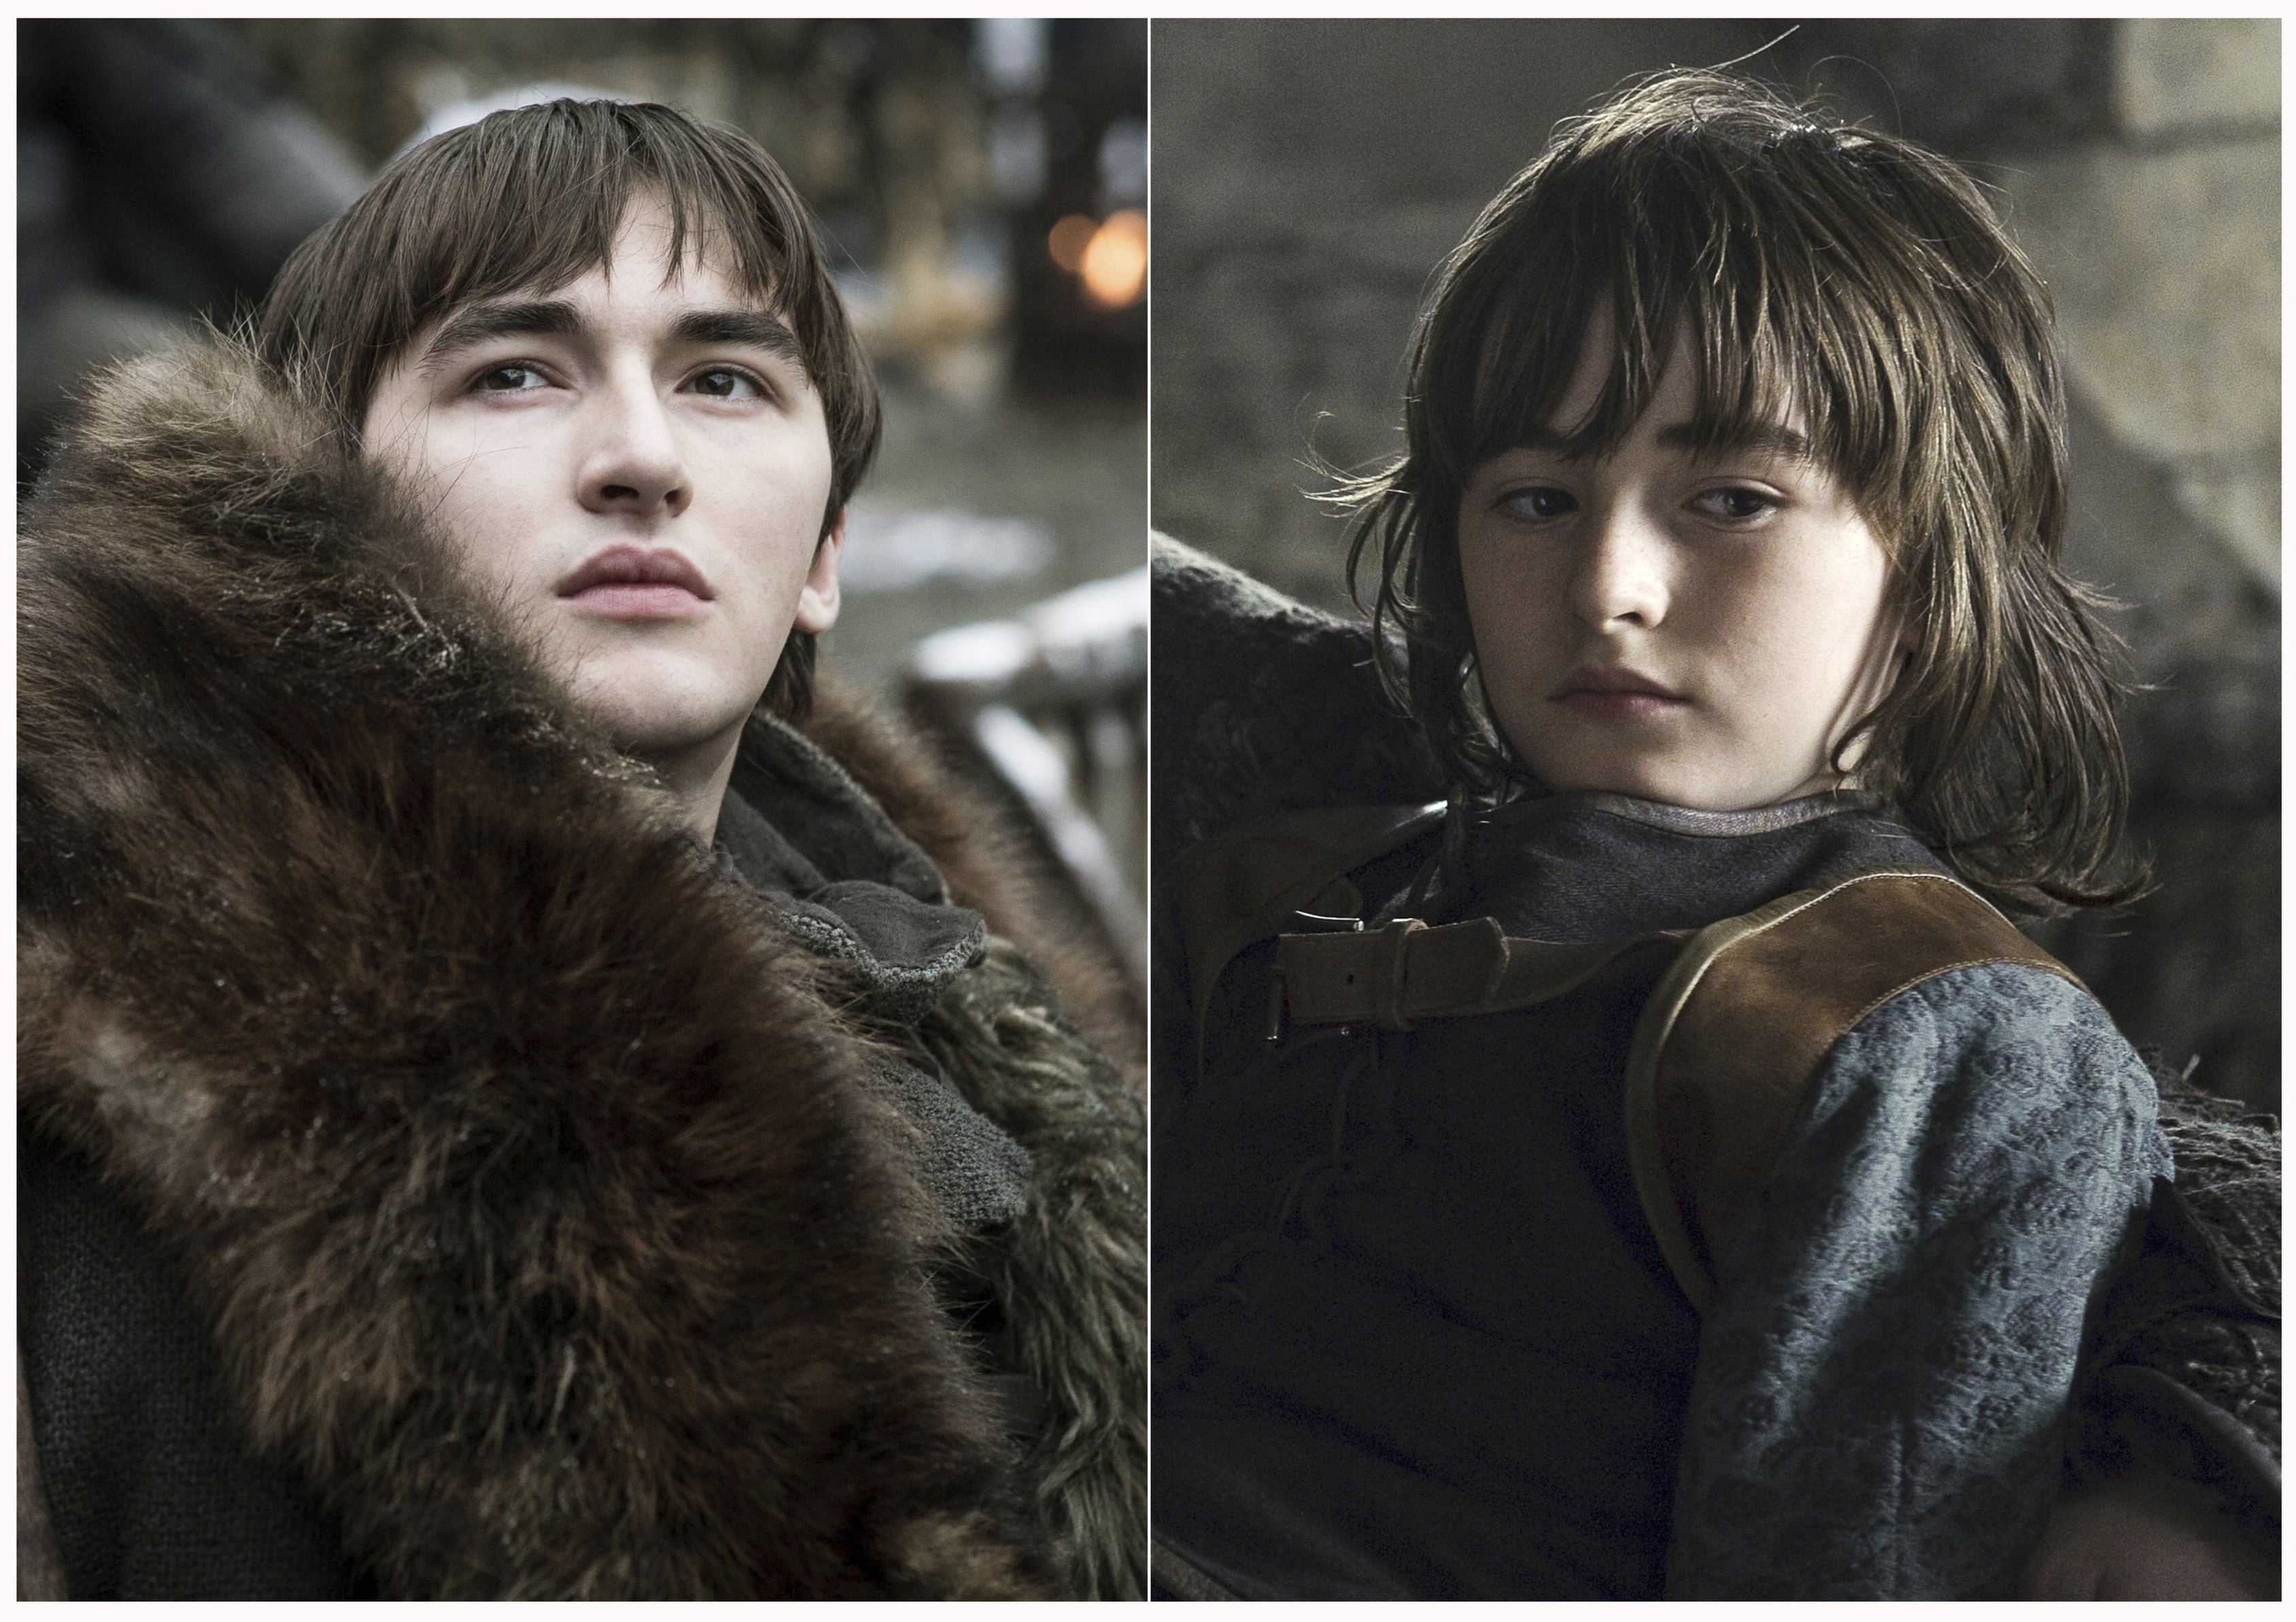 This combination photo of images released by HBO shows Isaac Hempstead Wright portraying Bran Stark in "Game of Thrones." The final episode of the popular series aired on Sunday, May 19, 2019.